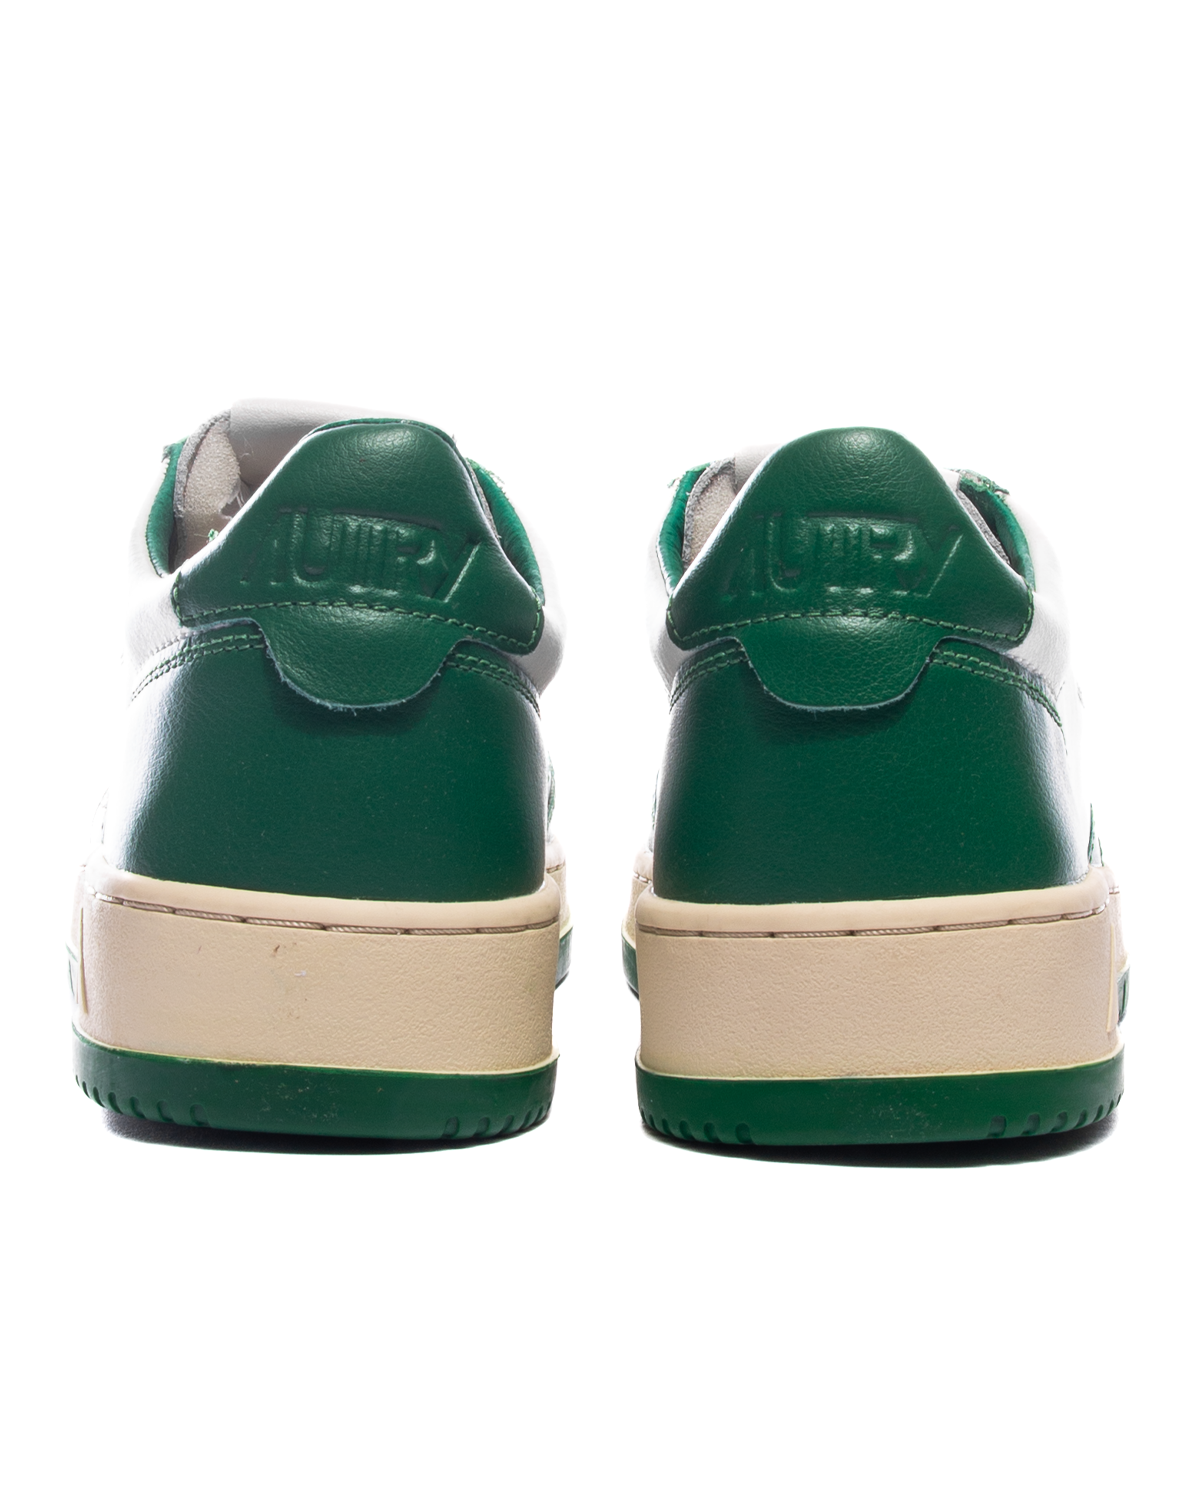 Medalist Low Leather/Leather White/Green